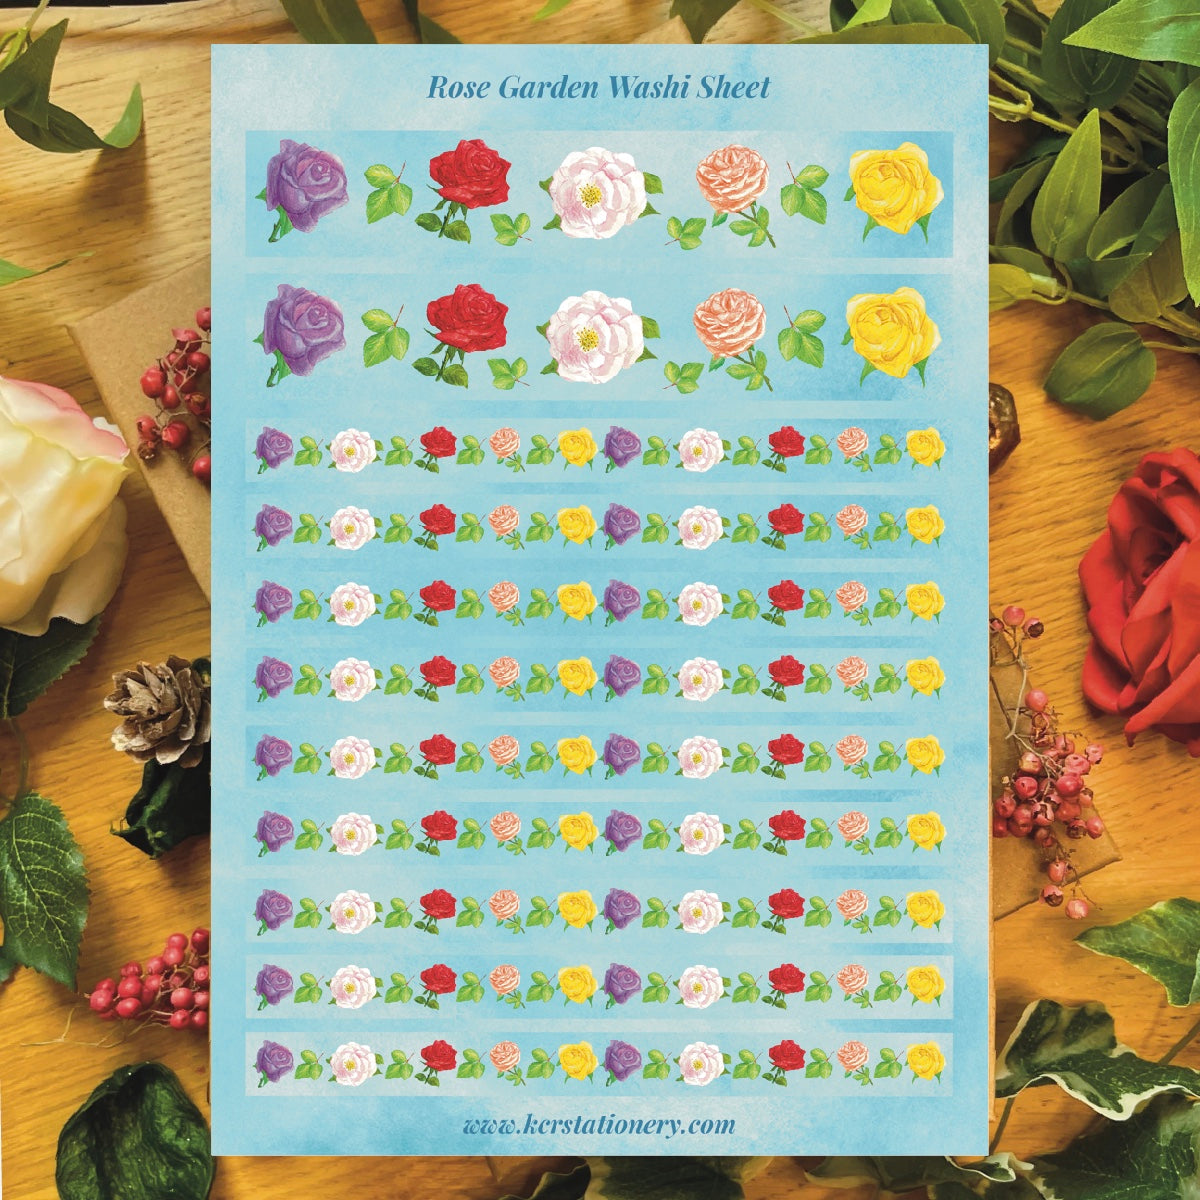 Rose garden Washi sheet with 2 wide and 9 narrow Washi strip samplers decorated with roses on a sky blue background 